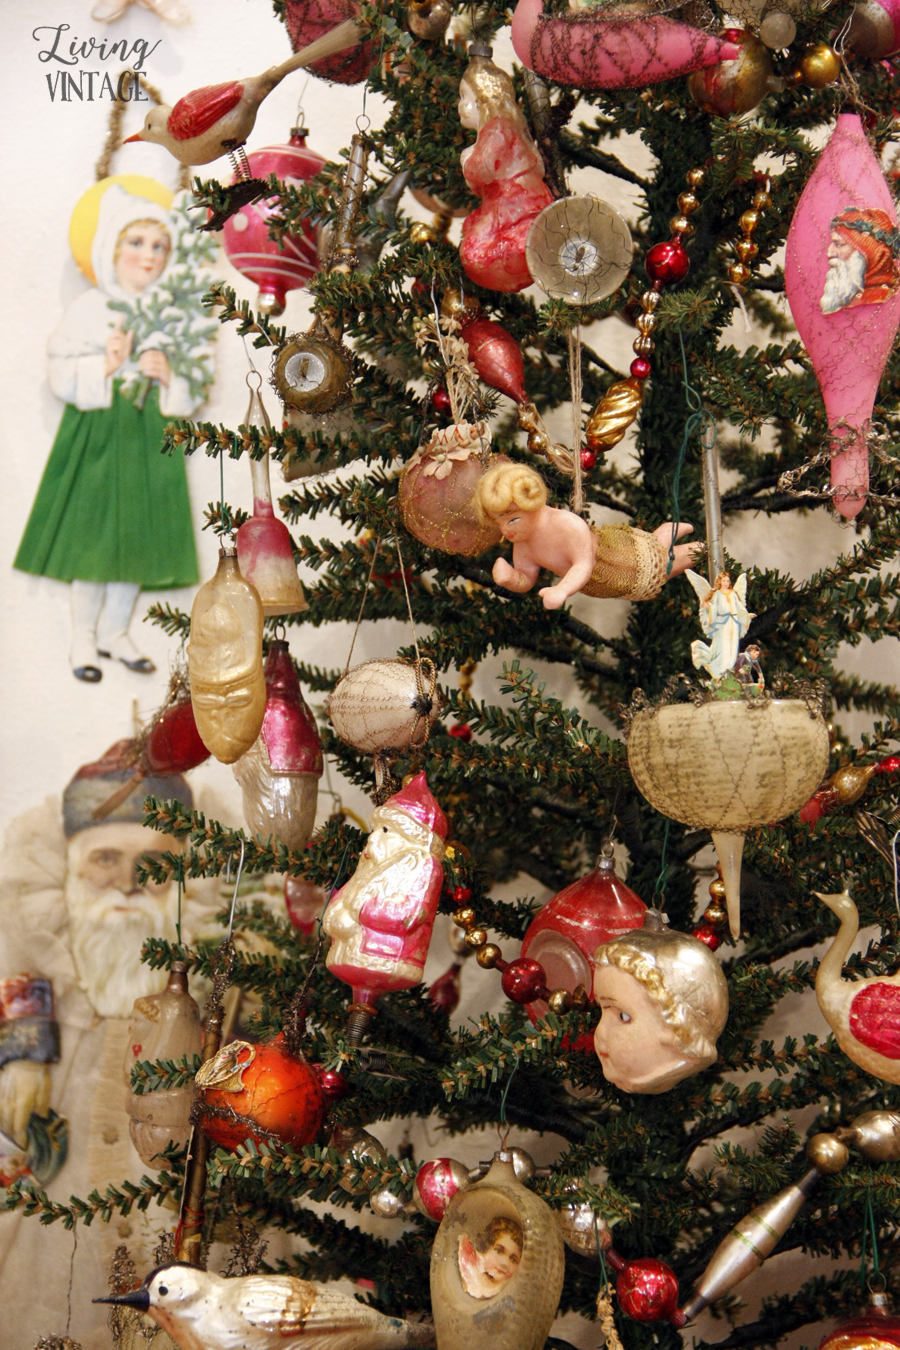 a pretty and elaborate display of an astounding Christmas collection